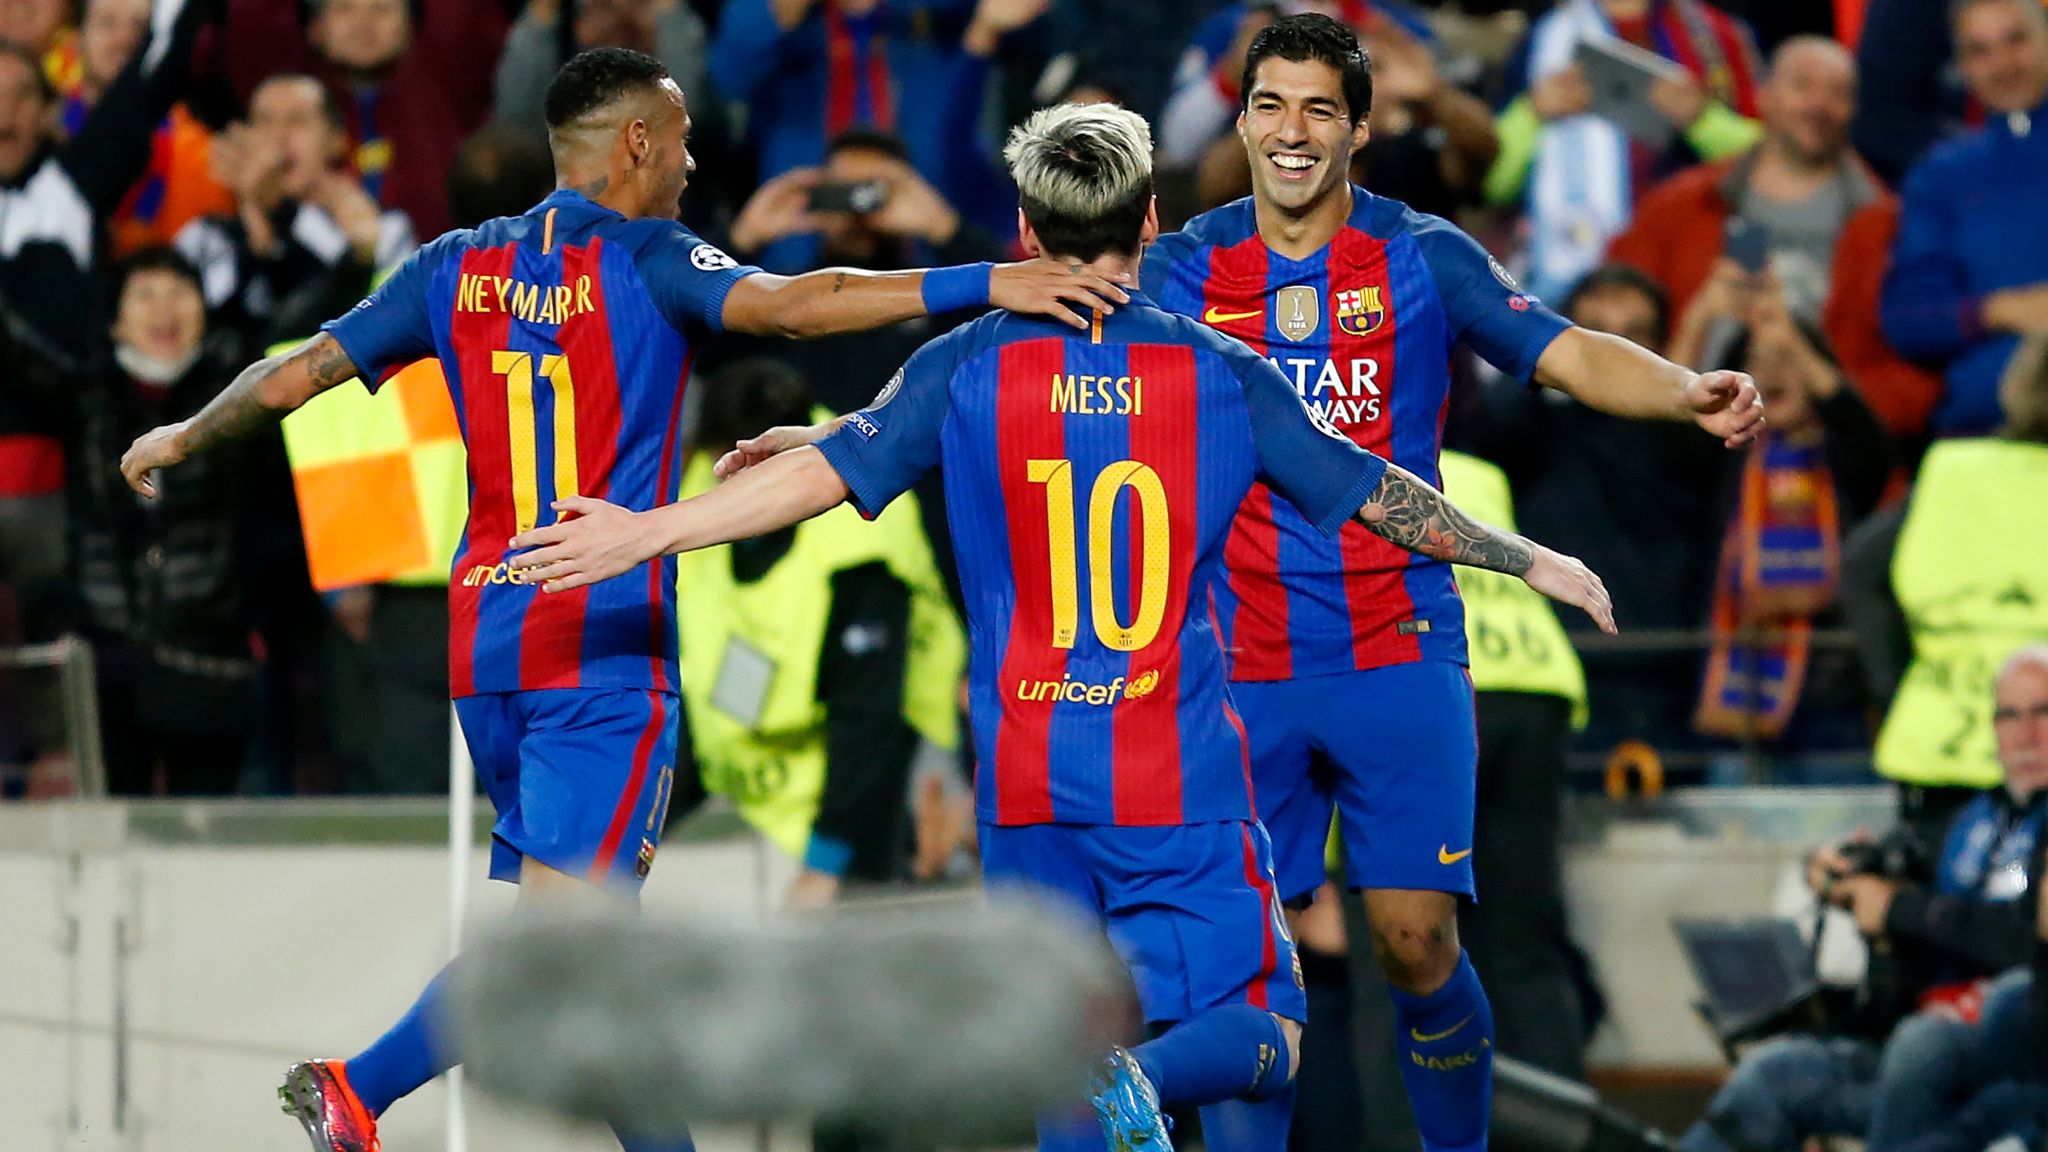 Barcelona confirm record kit deal with Nike - Football News - Sky Sports